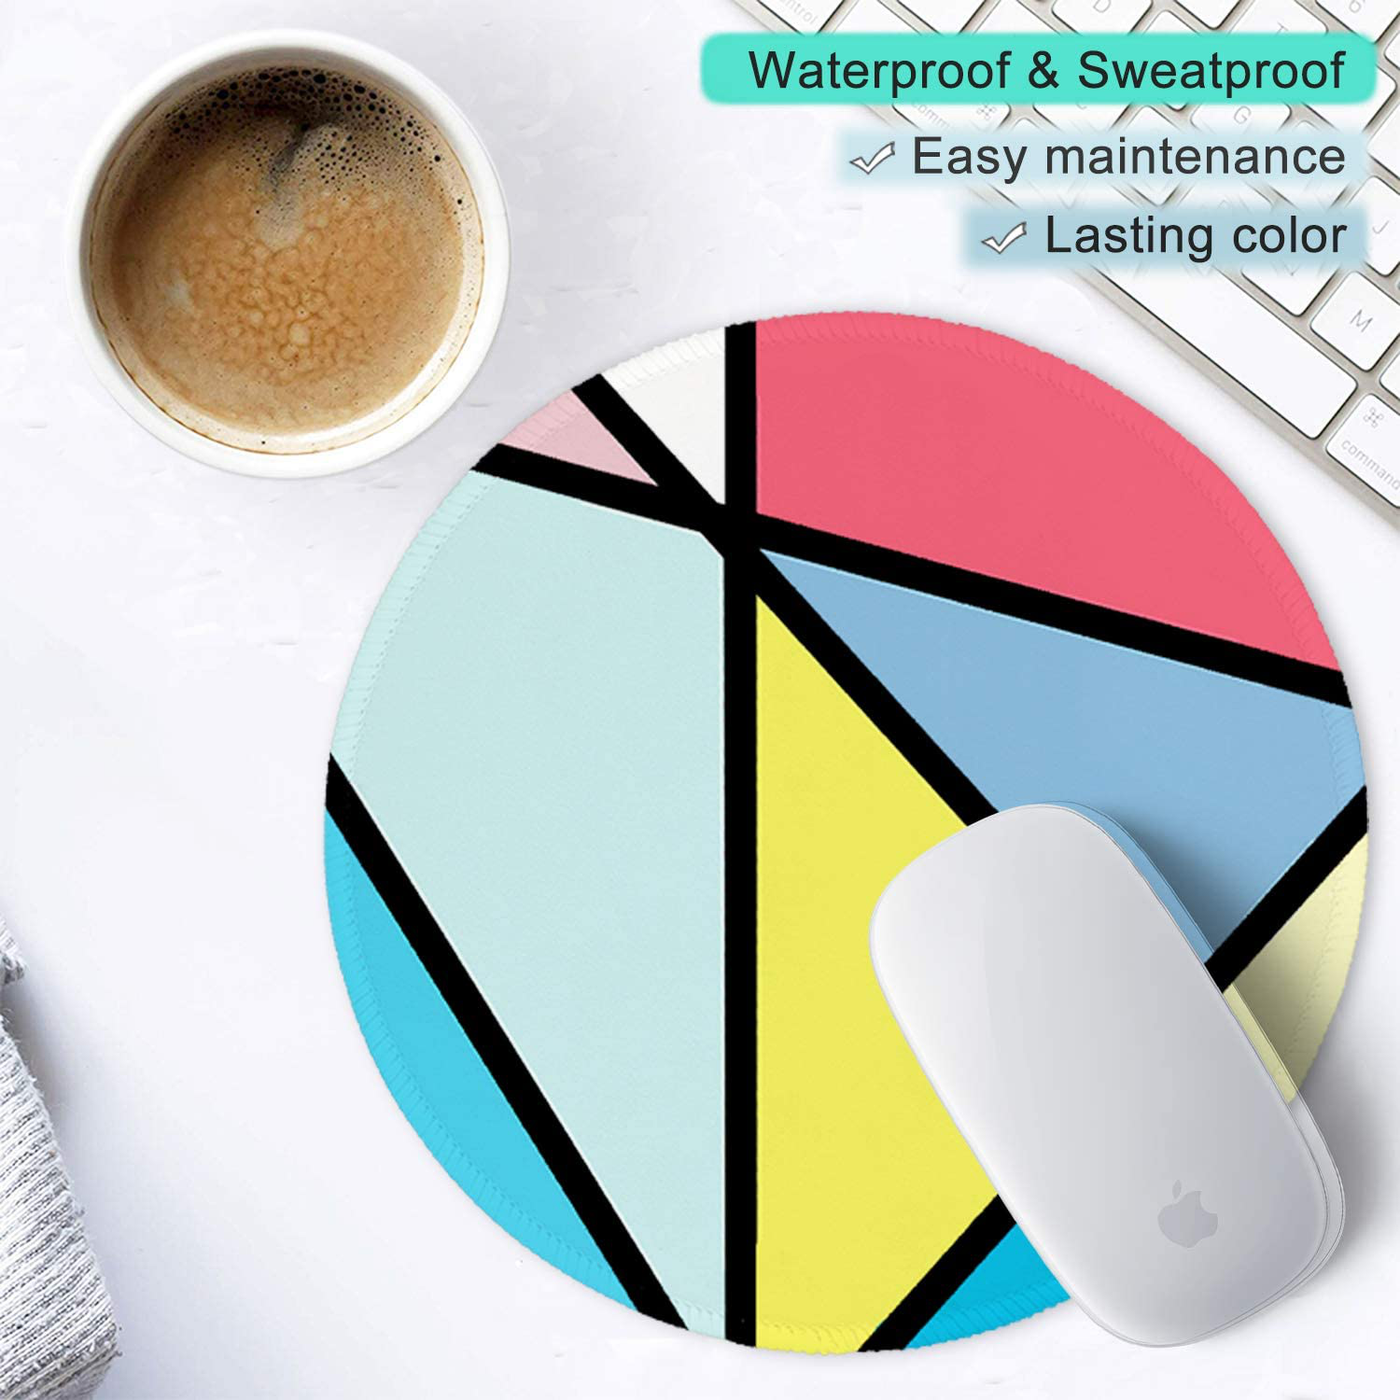 ITNRSIIET Mouse Pad, Colorful Geometric Pattern Design Round Mousepad. Customized Gaming Mousepads for Laptop and Computer. Cute Design Desk Accessories. Non-Slip, Stitched Edges, Waterproof